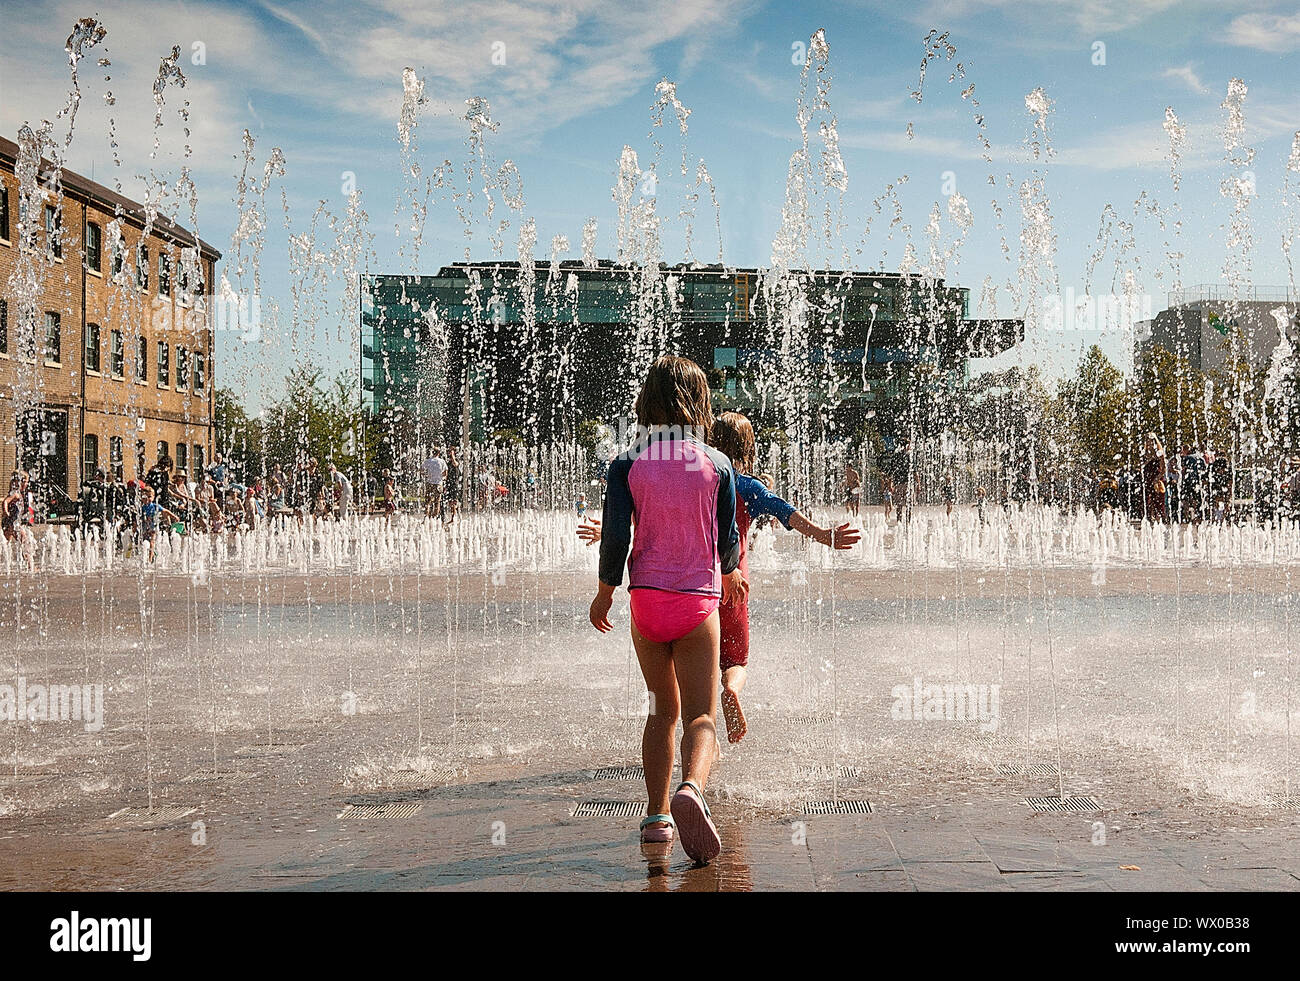 Children at play in the fountains in Granery Sq Kings Cross London UK Stock Photo